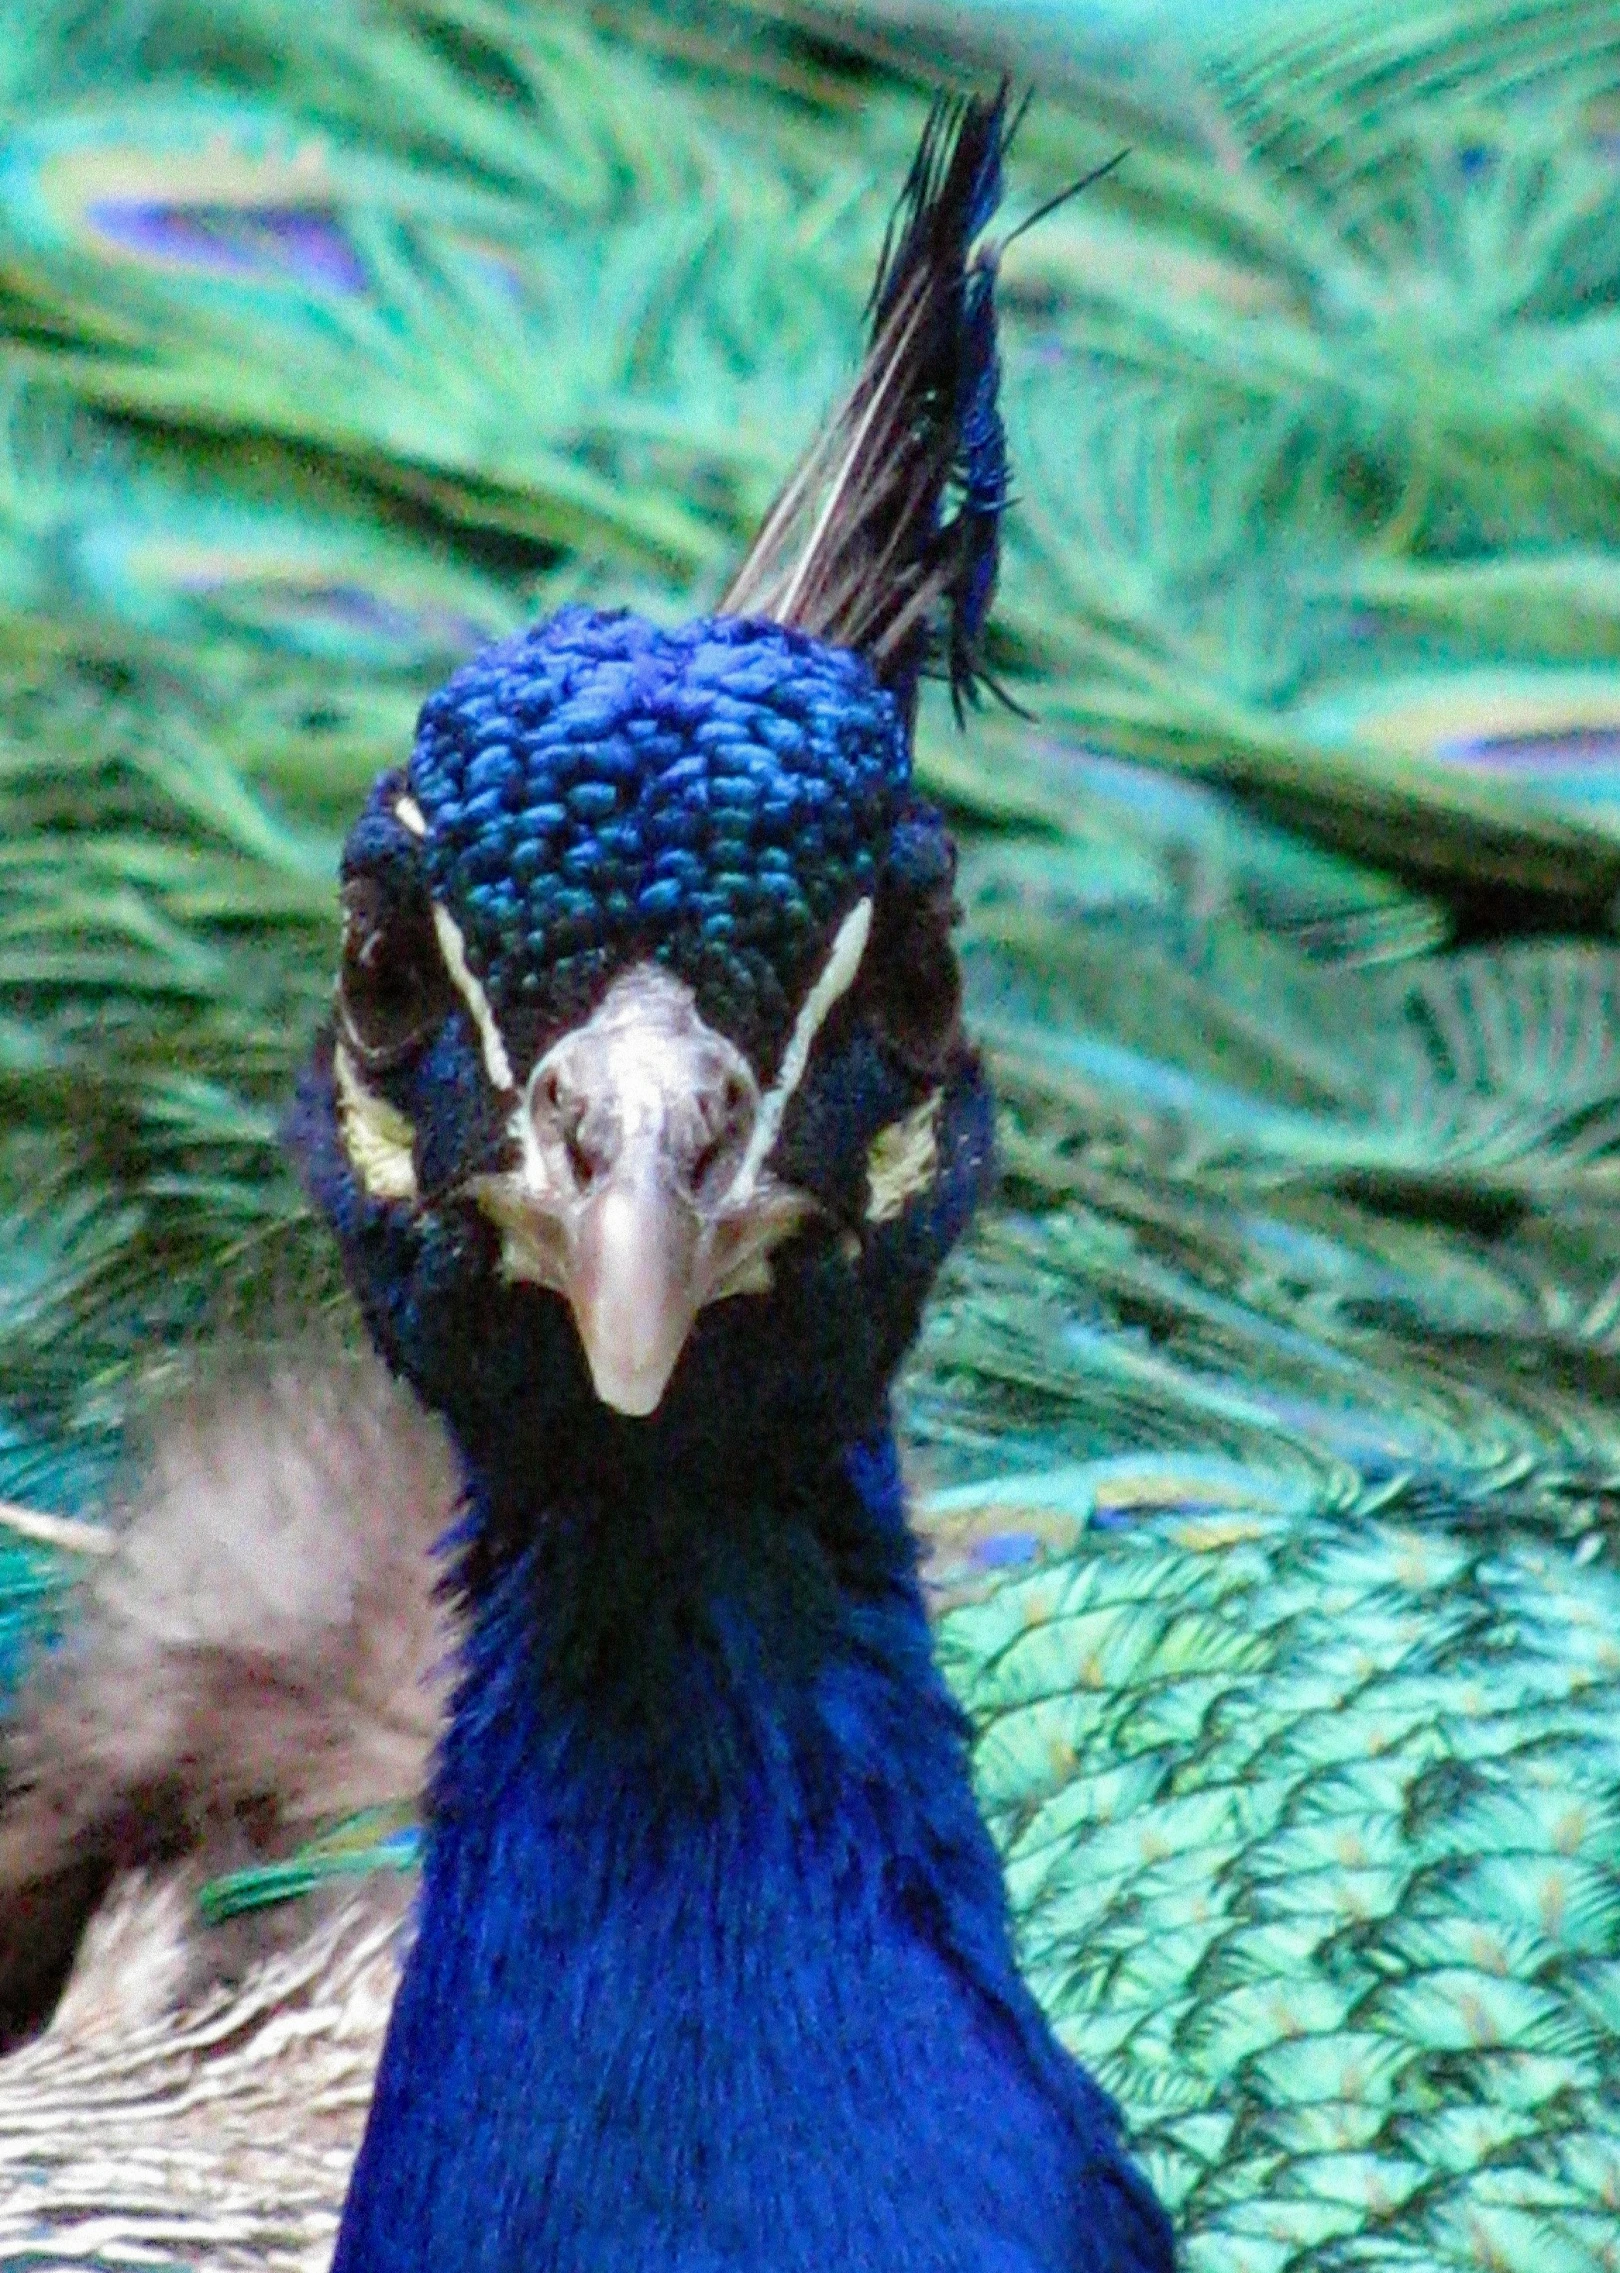 blue peacock with feathers standing near water